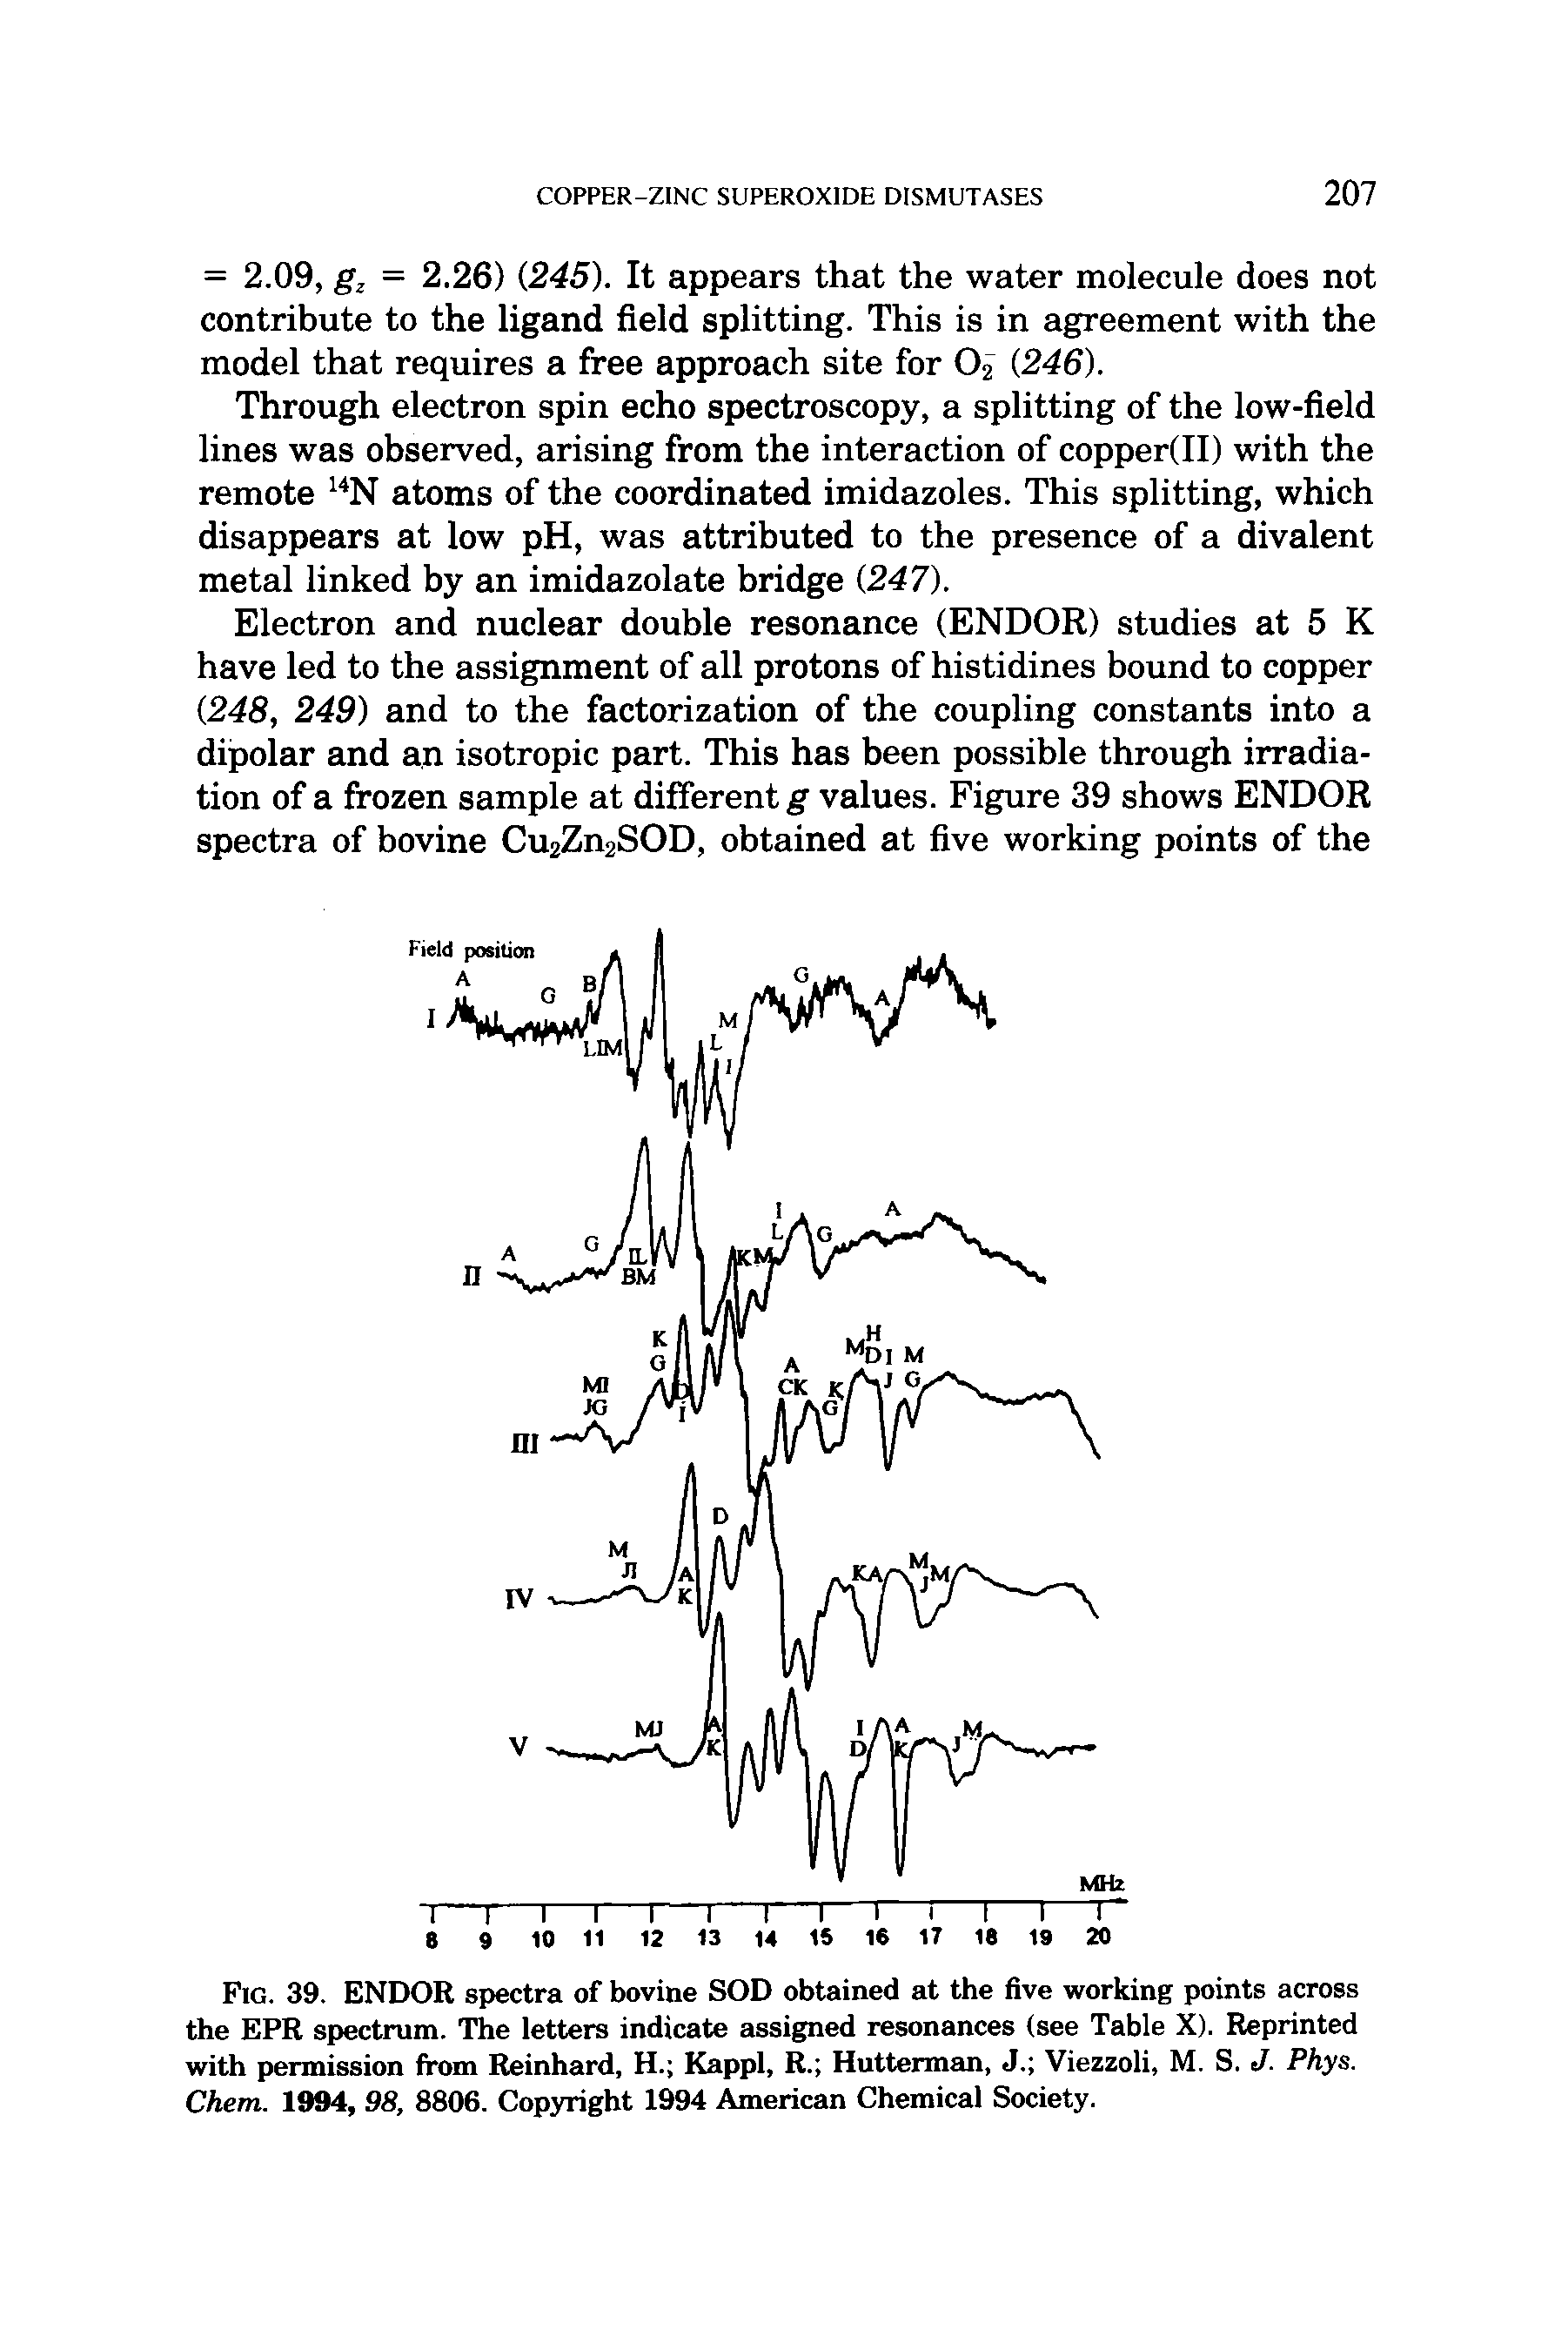 Fig. 39. ENDOR spectra of bovine SOD obtained at the five working points across the EPR spectrum. The letters indicate assigned resonances (see Table X). Reprinted with permission from Reinhard, H. Kappl, R. Hutterman, J. Viezzoli, M. S. J. Phys. Chem. 1994, 98, 8806. Copyright 1994 American Chemical Society.